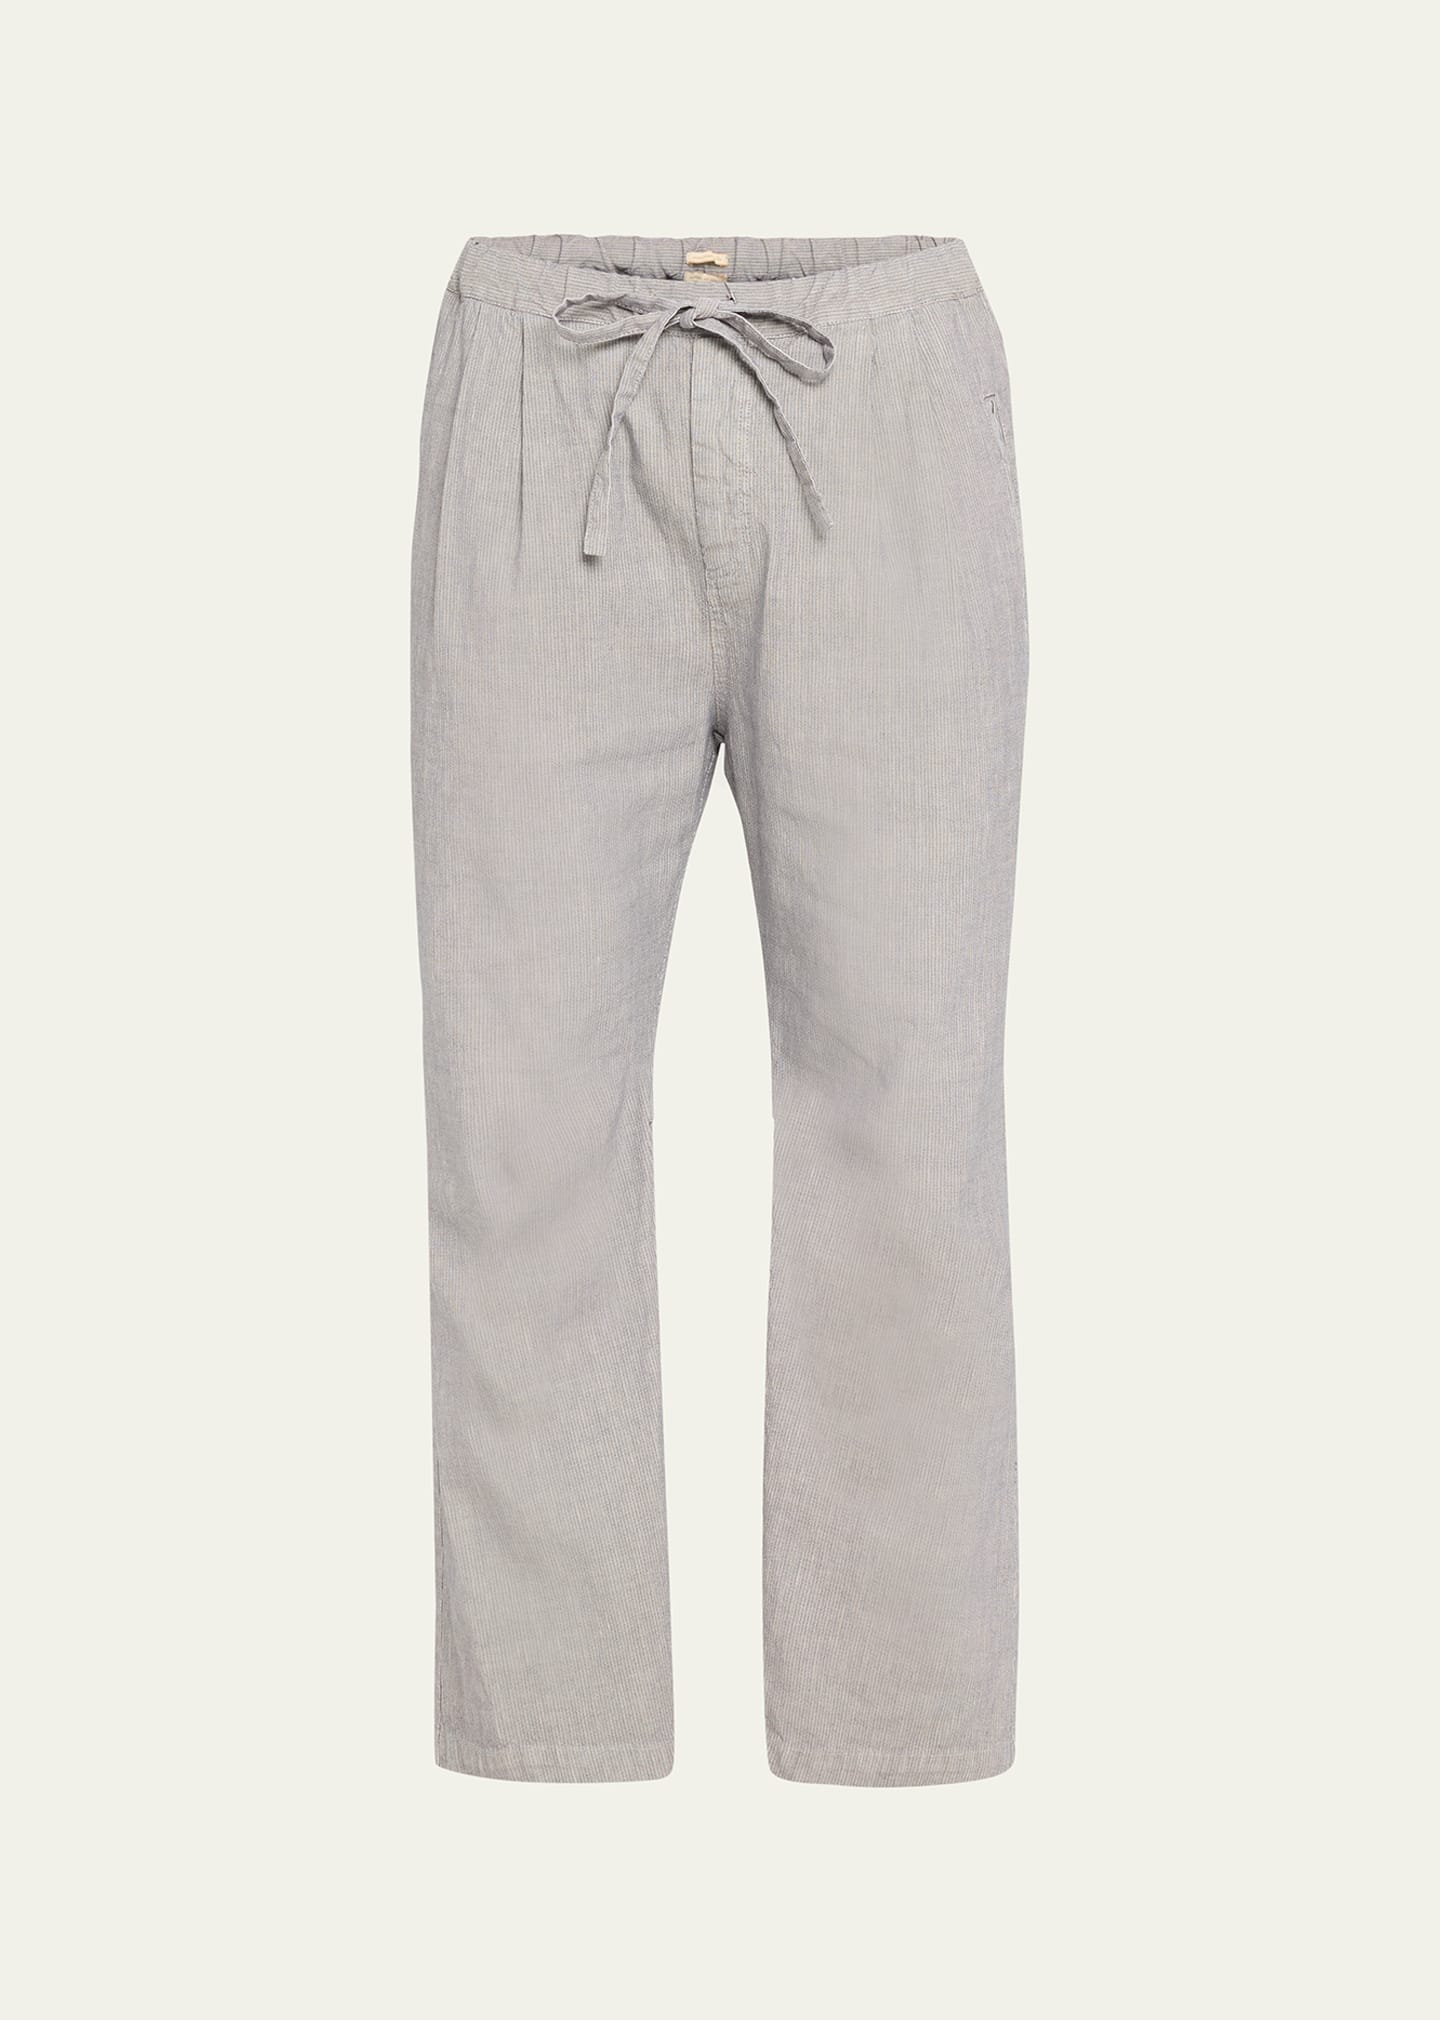 Massimo Alba Men's Cotton-linen Relaxed Fit Drawstring Pants In Calce